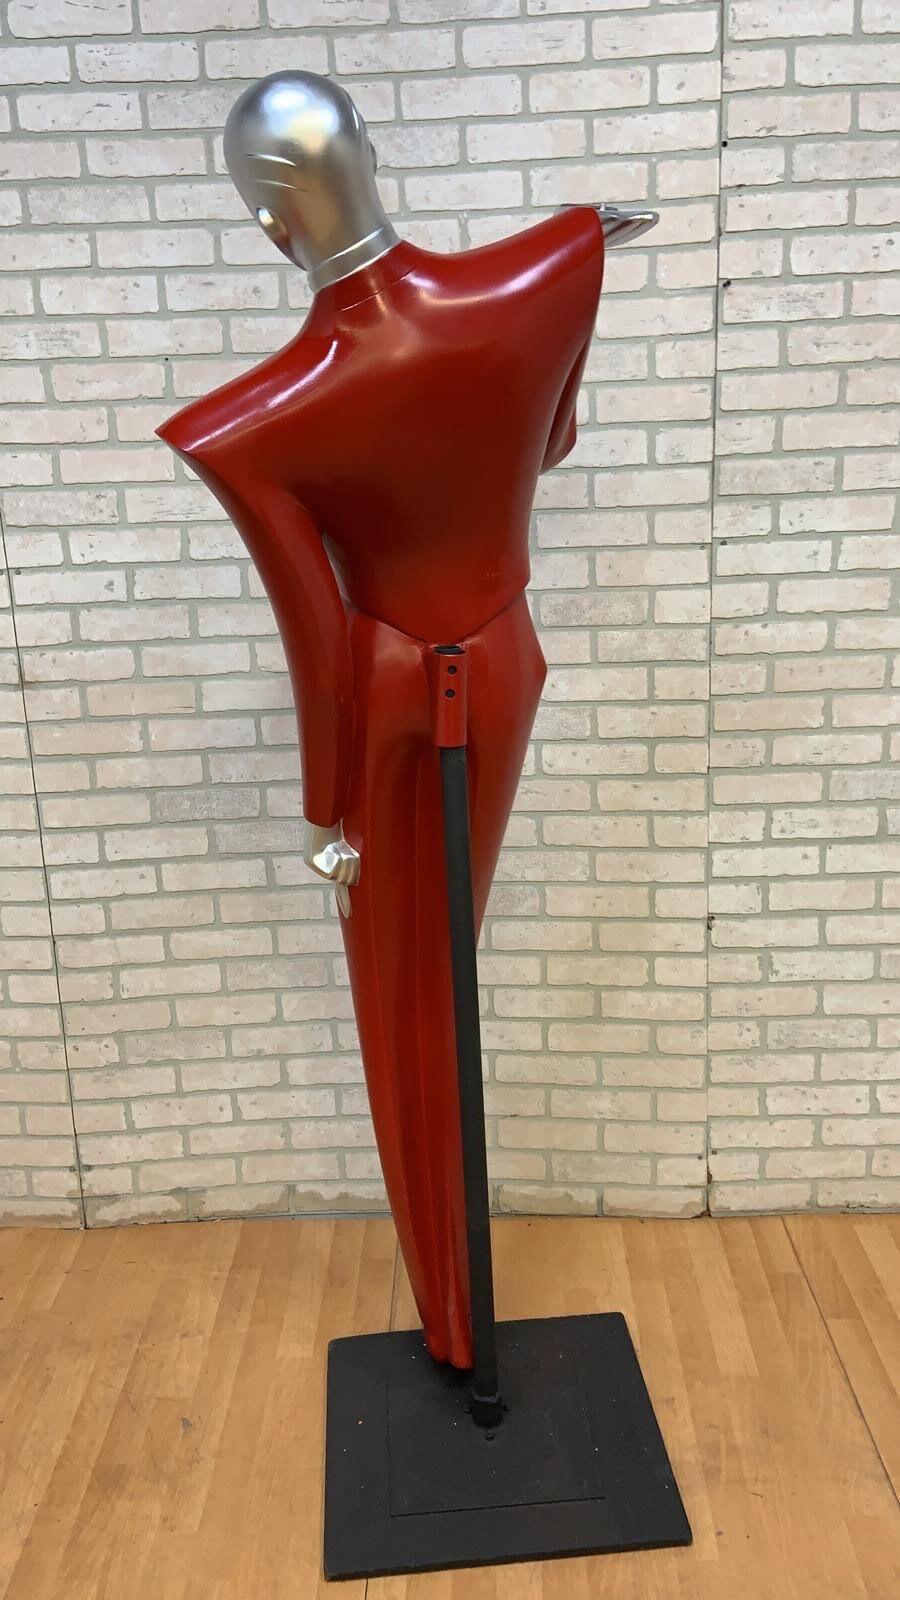 Vintage Art Deco Revival Chrome & Resin LeGarcon Mannequin by Lindsey Balkweill In Good Condition For Sale In Chicago, IL